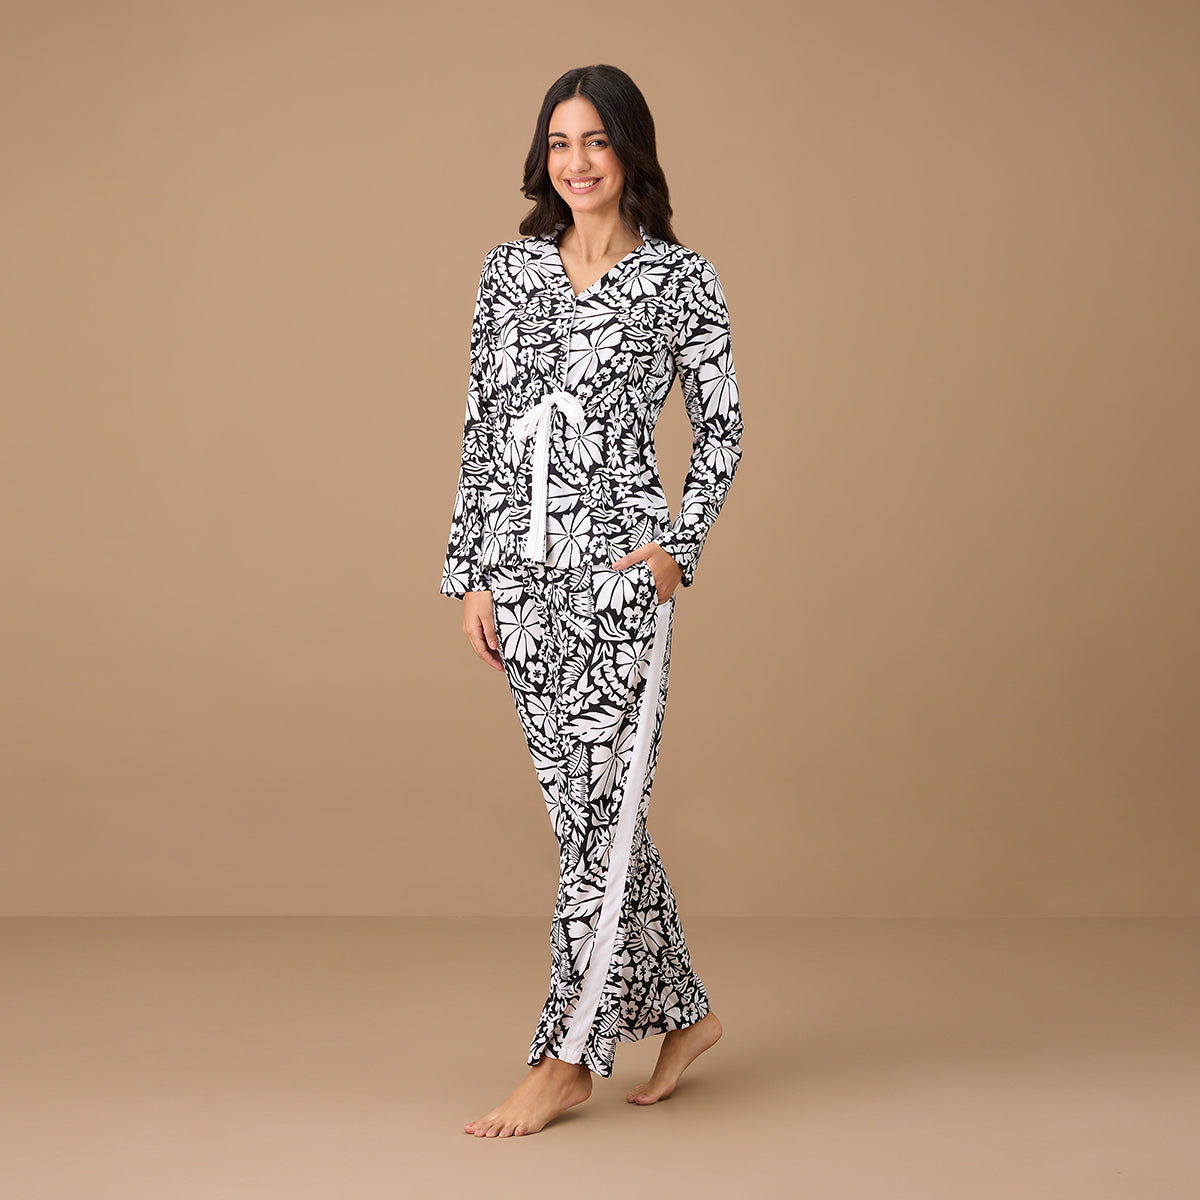 Nykd By Nykaa Style Me Up Rayon Set - NYS904 - Black & White Print